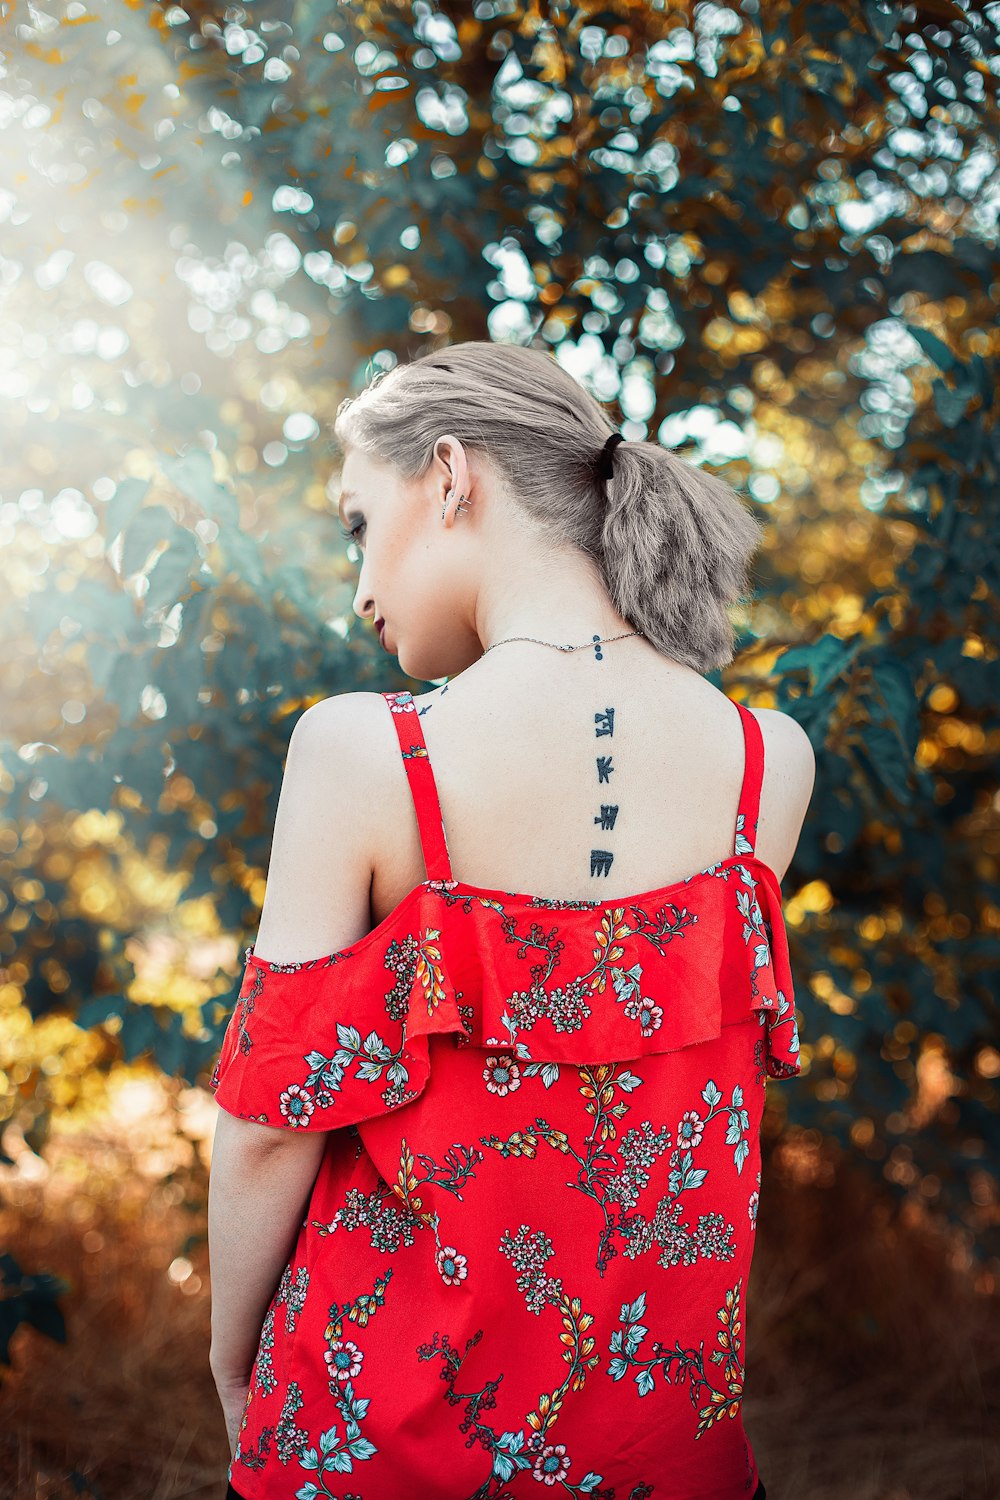 woman in red and white floral sleeveless dress standing near green trees during daytime